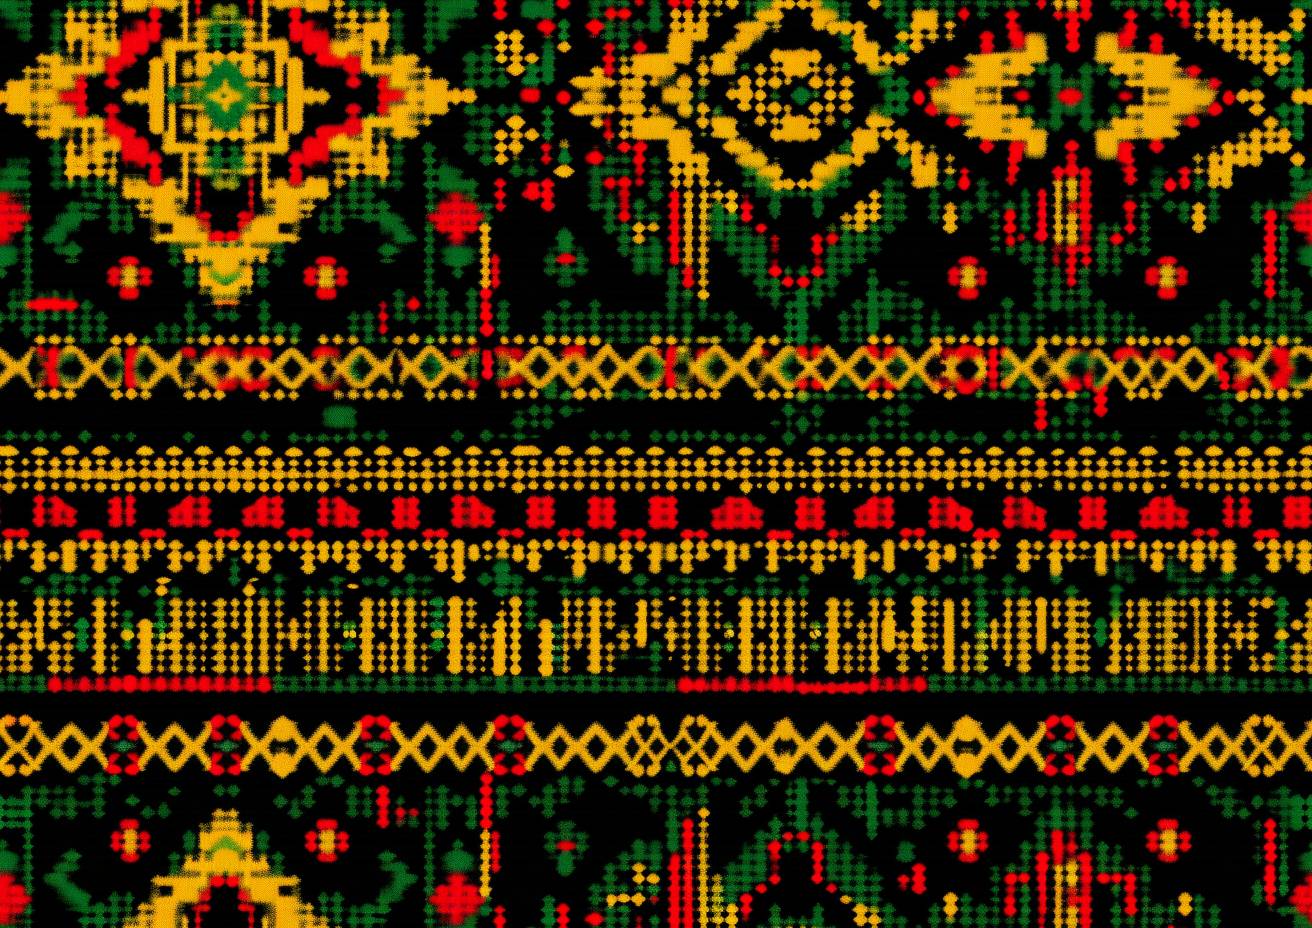 African tribal pattern, in the style of red, green, and yellow colors, in the style of African print style fabric design